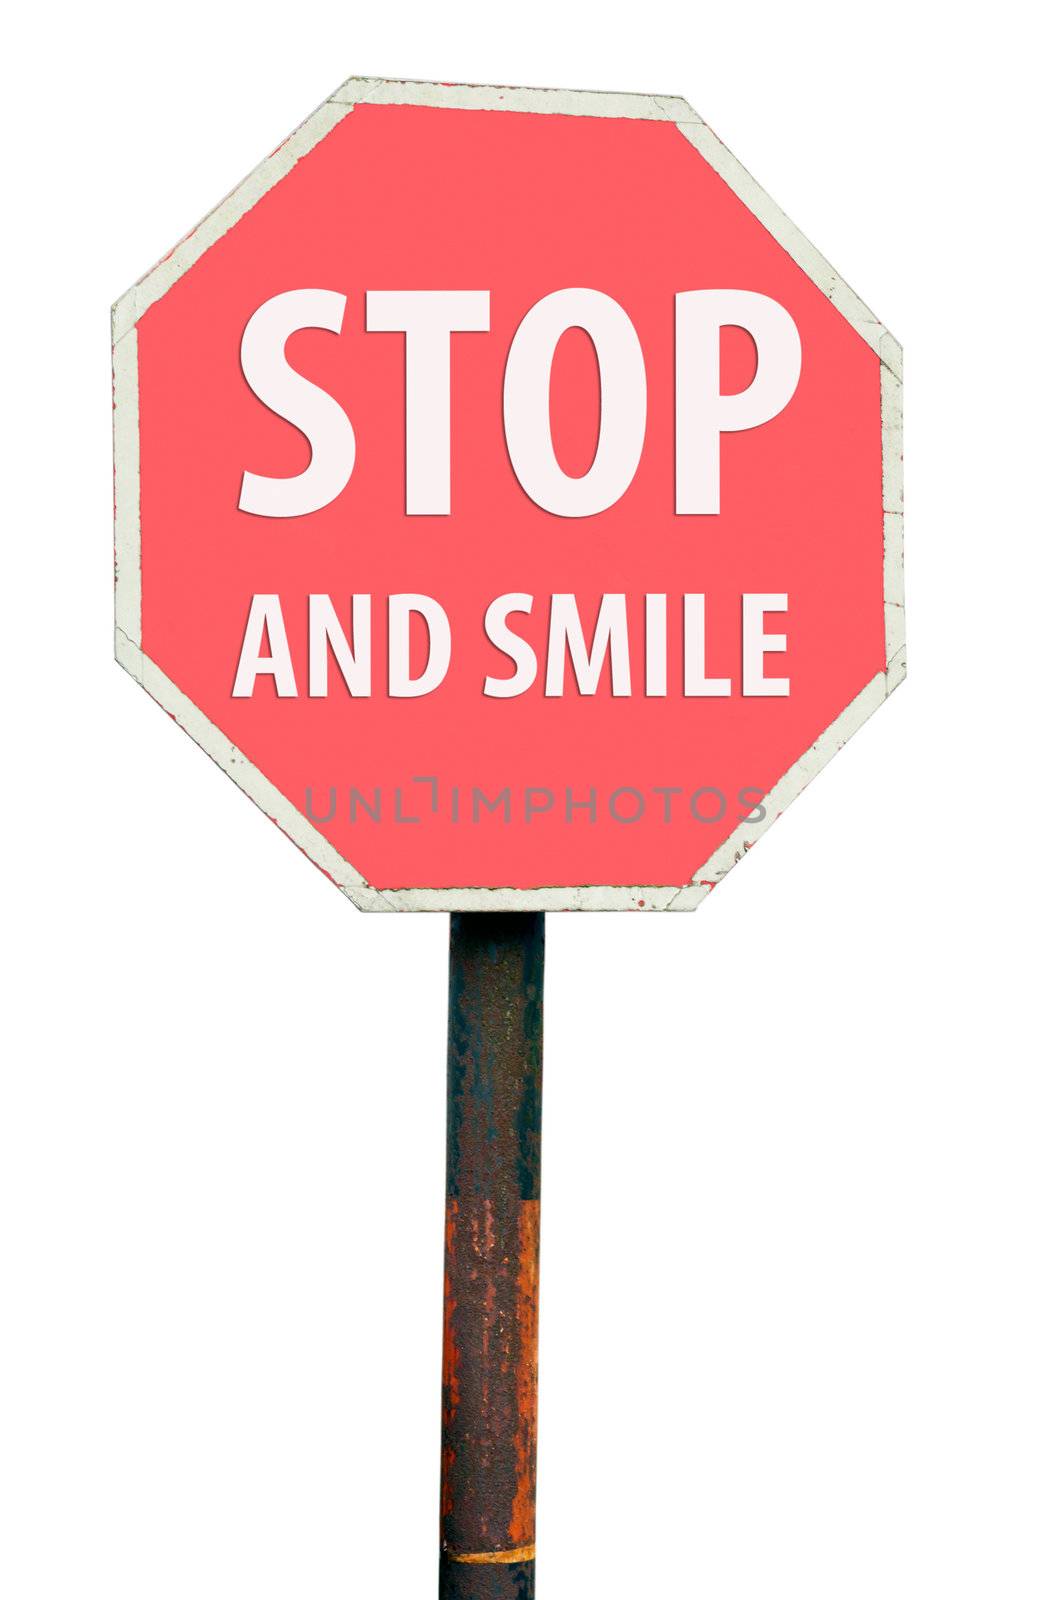 Stop and smile sign by luissantos84